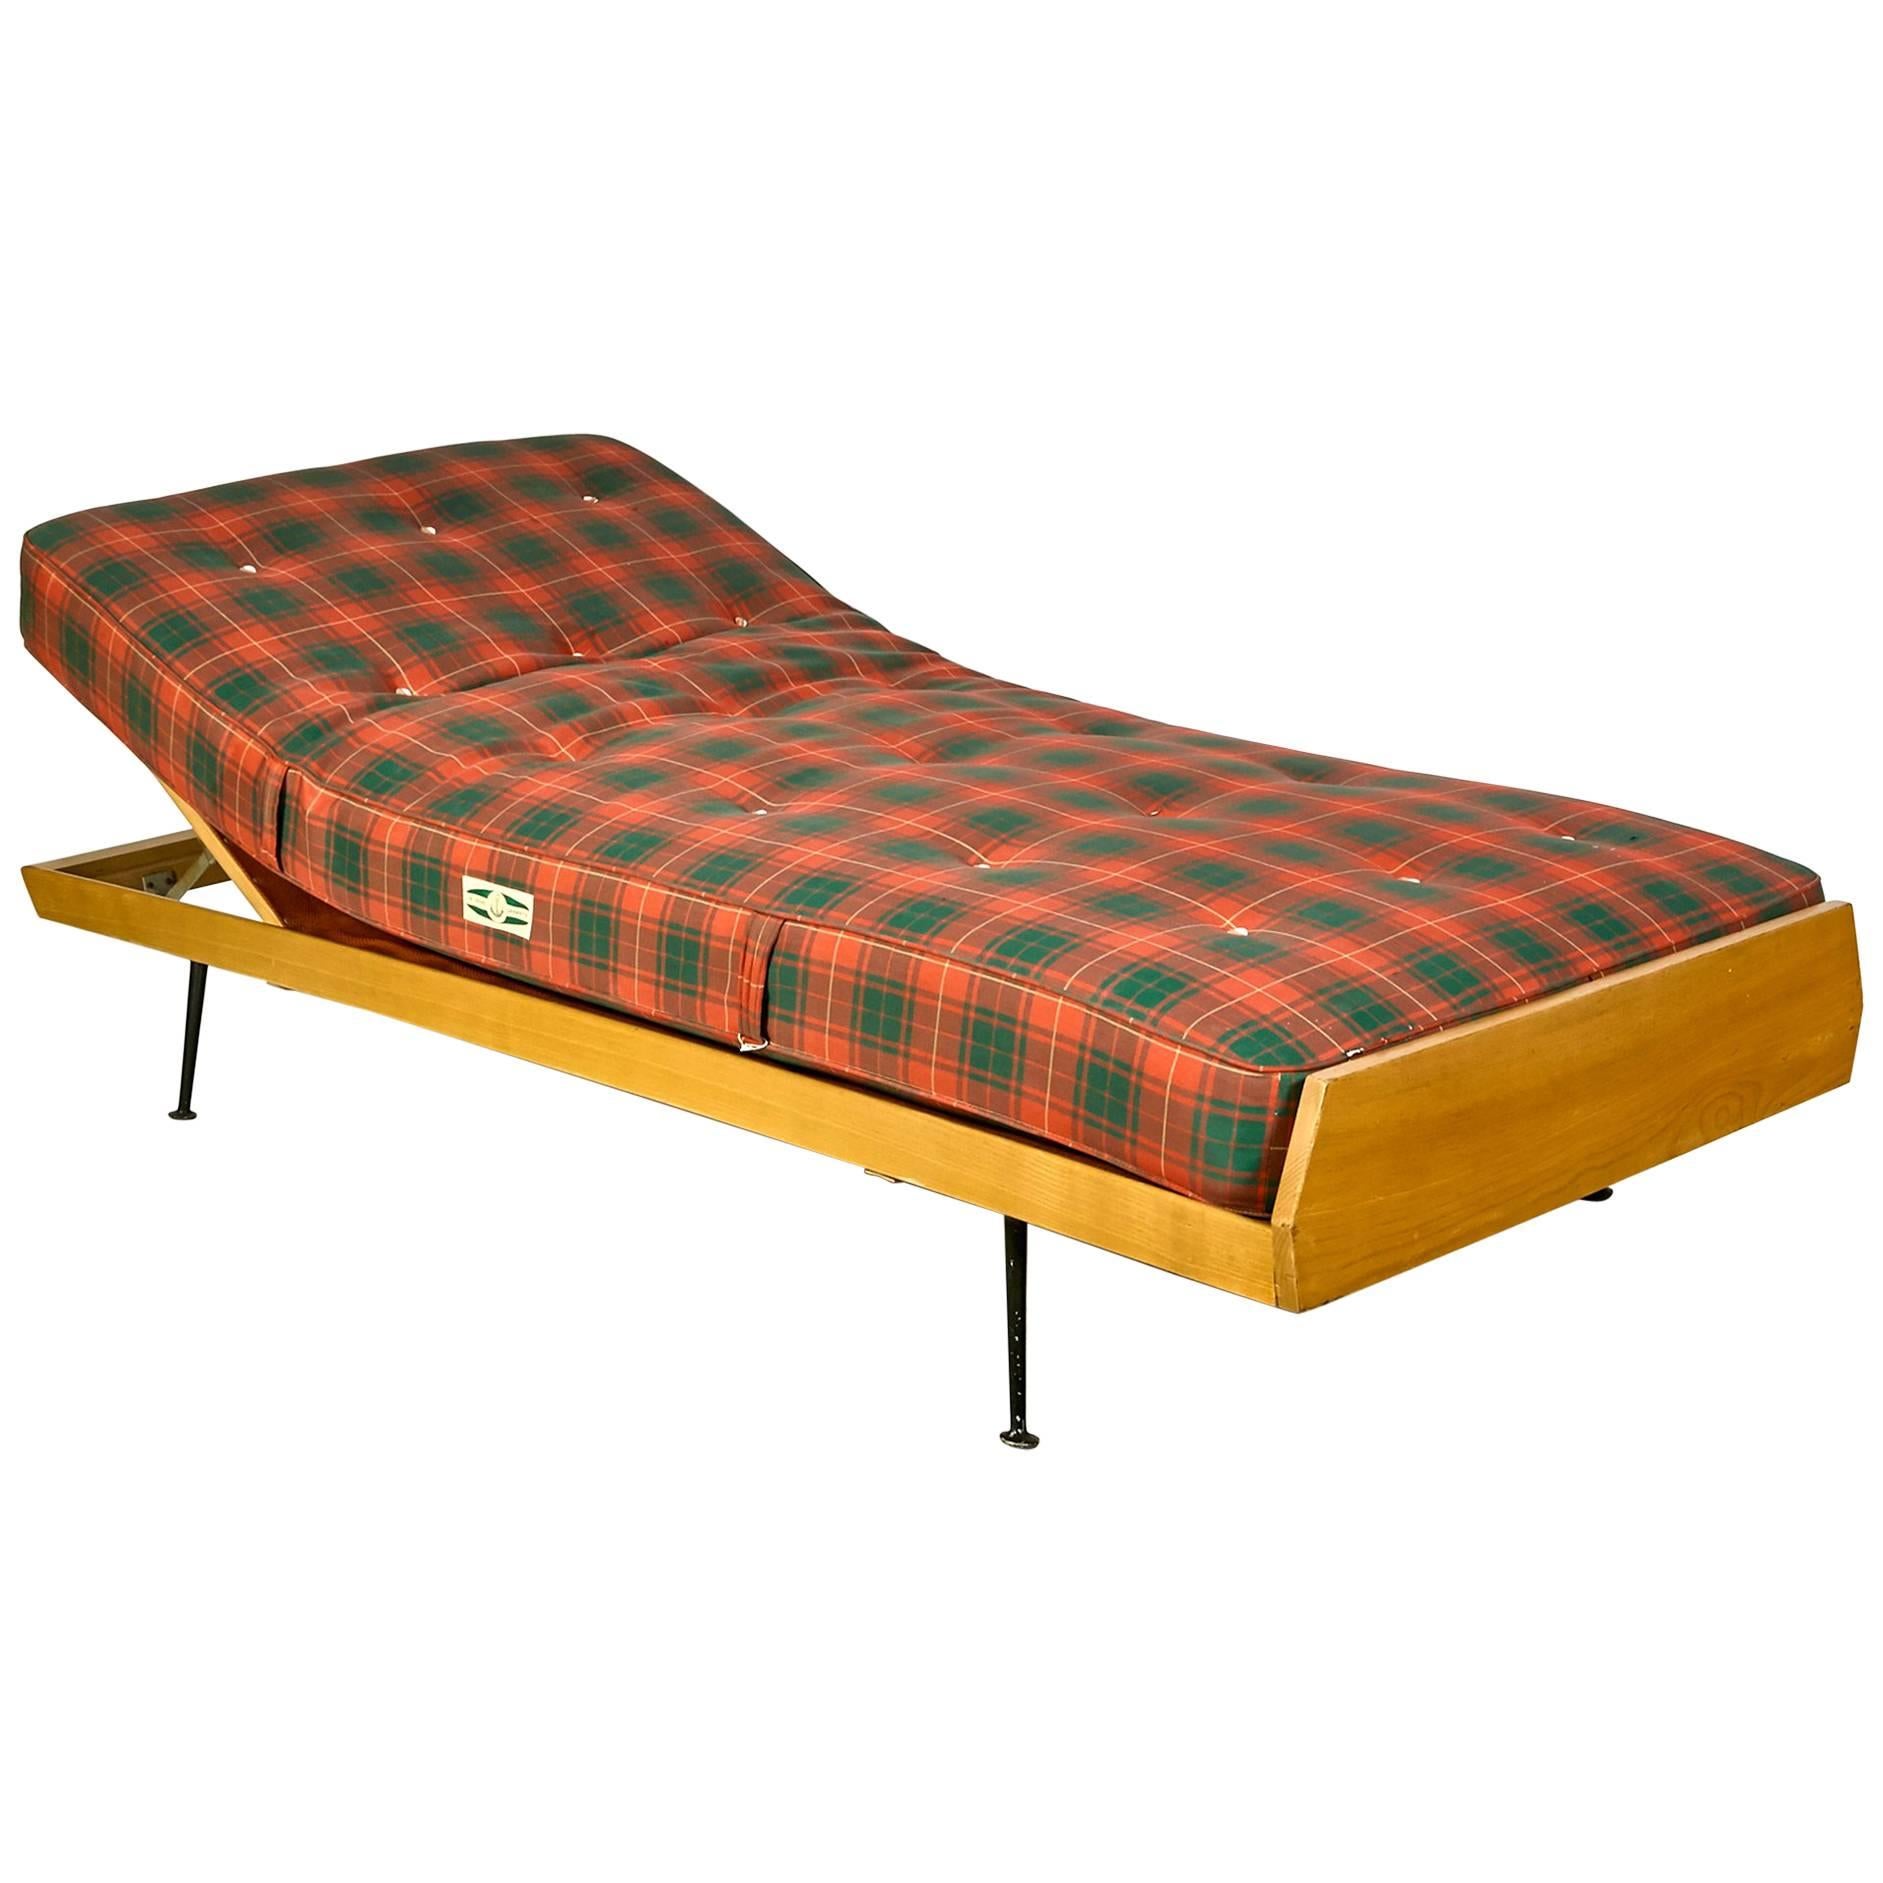 German Daybed with Slant Legs, 1950s For Sale